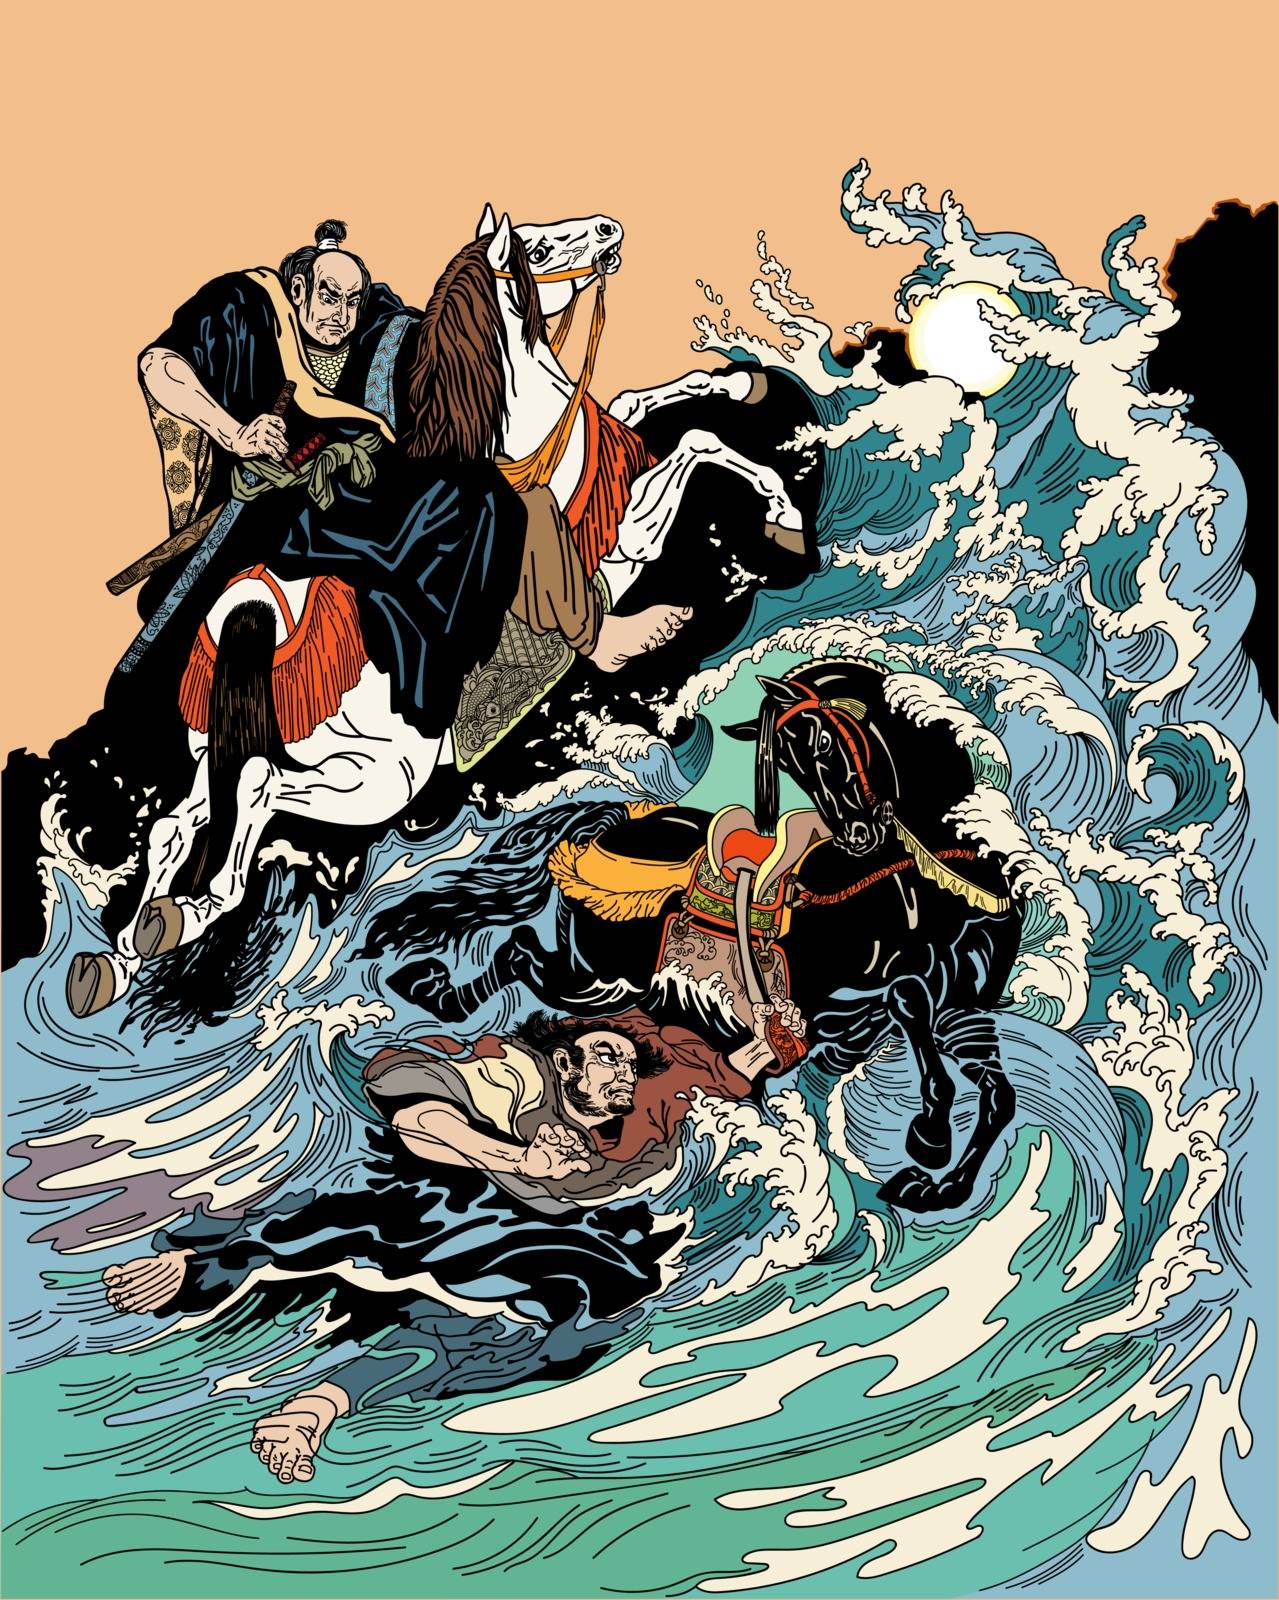 Two samurai horsemen crossing a stormy sea. One warrior with a black horse swimming in the water, another man rider on land riding a white horse. Graphic style vector illustration